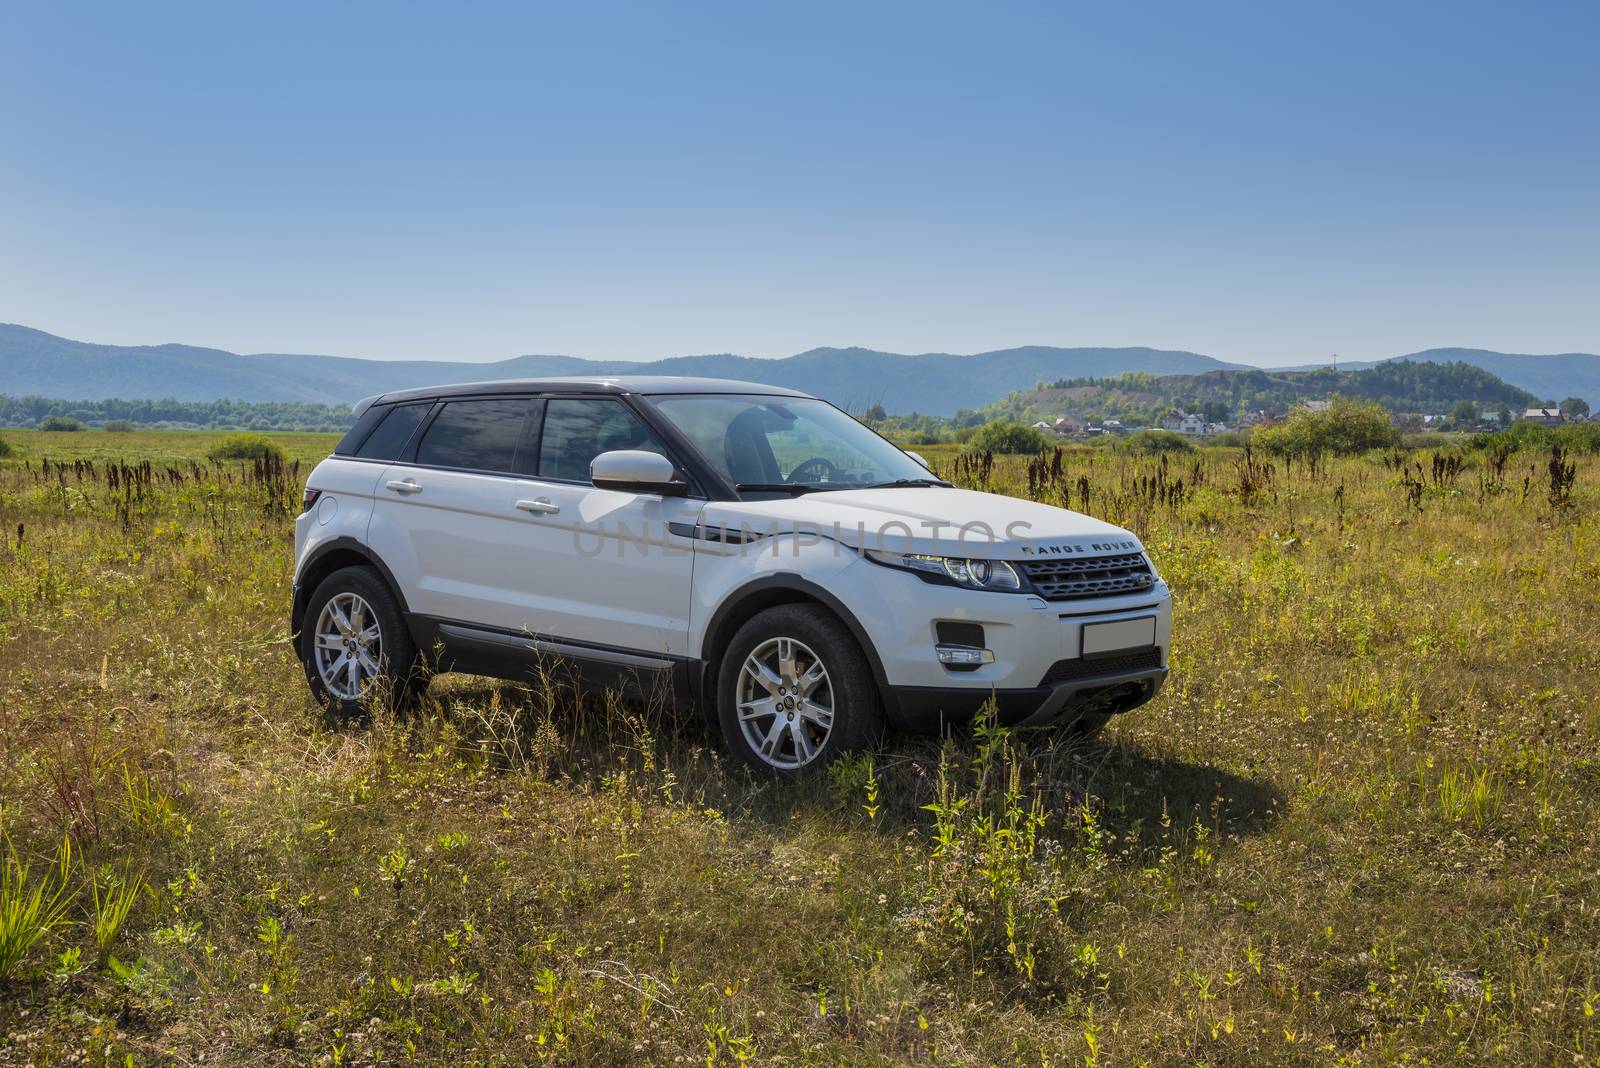 Car Land Rover Range Rover is in the field on a Sunny autumn day near the city of Samara, Russia. August 1, 2018.